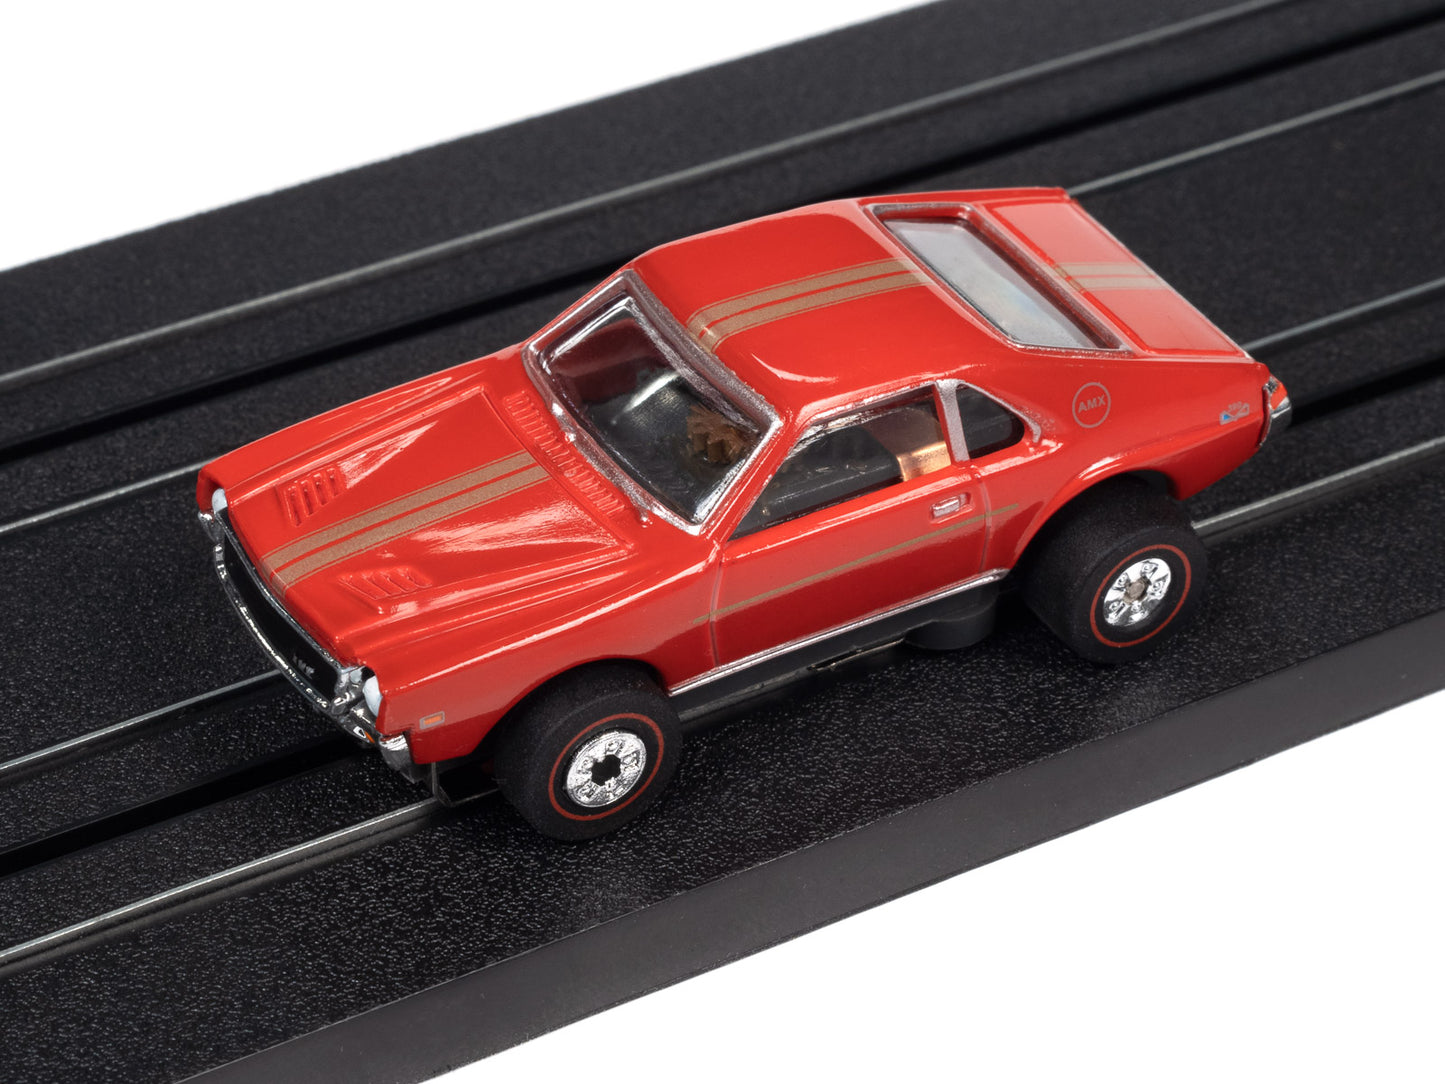 1969 AMC AMX Collier Motors (Red) H.O. Scale Slot Car, ThunderJet Chassis